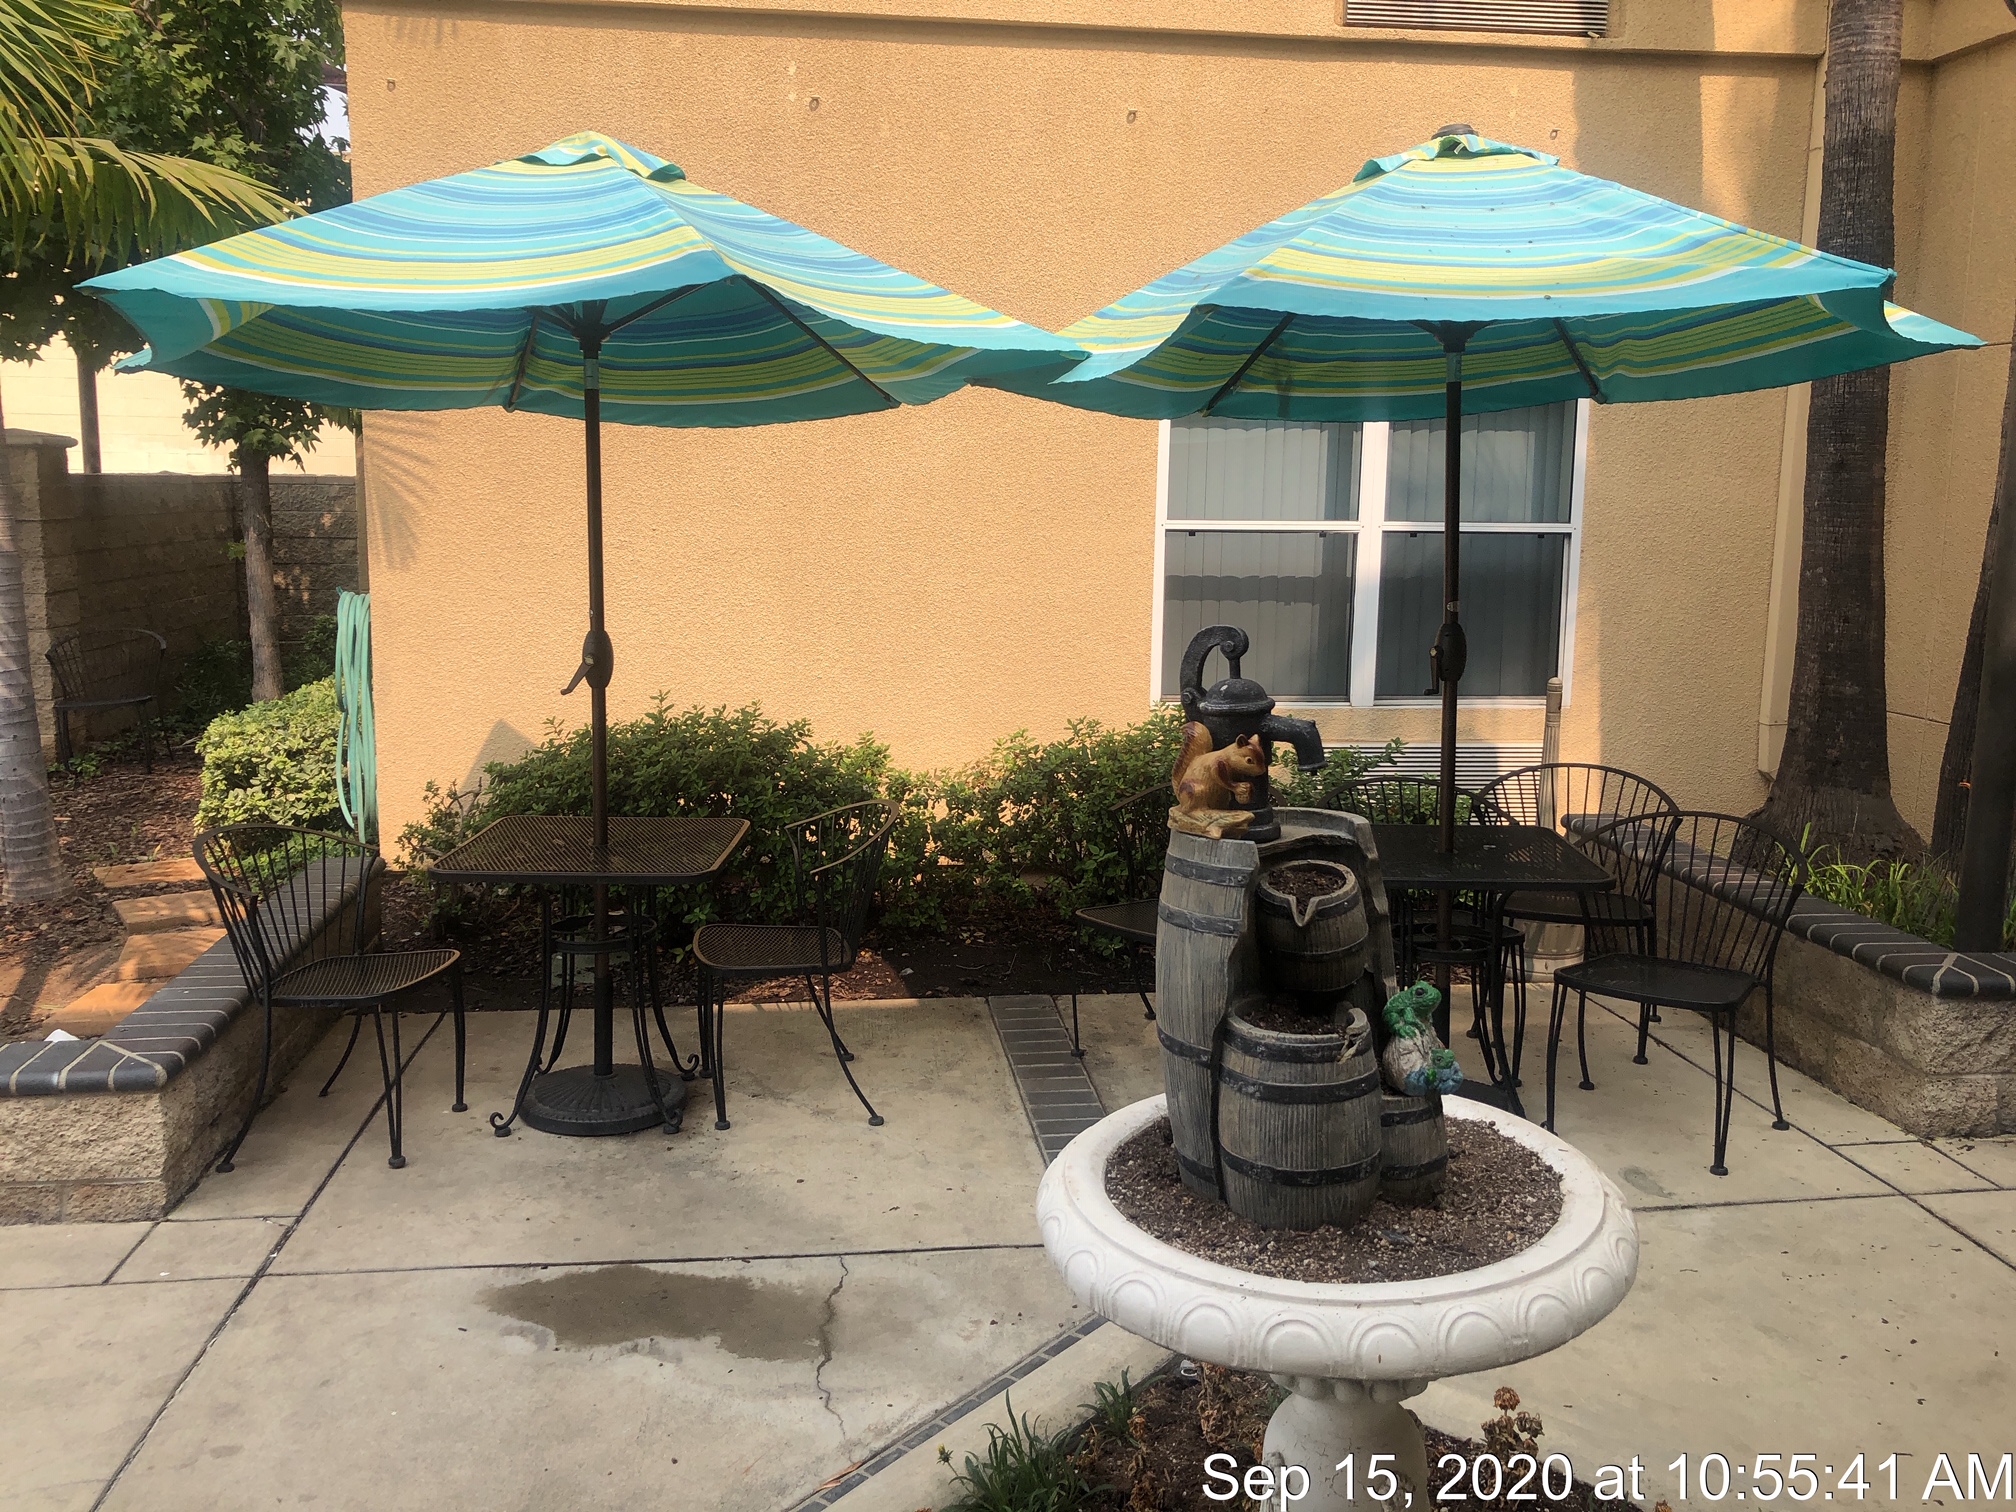 HFL Palms Court - View of a patio with two tables with umbrellas and chairs. There are plants and trees surrounding the area.